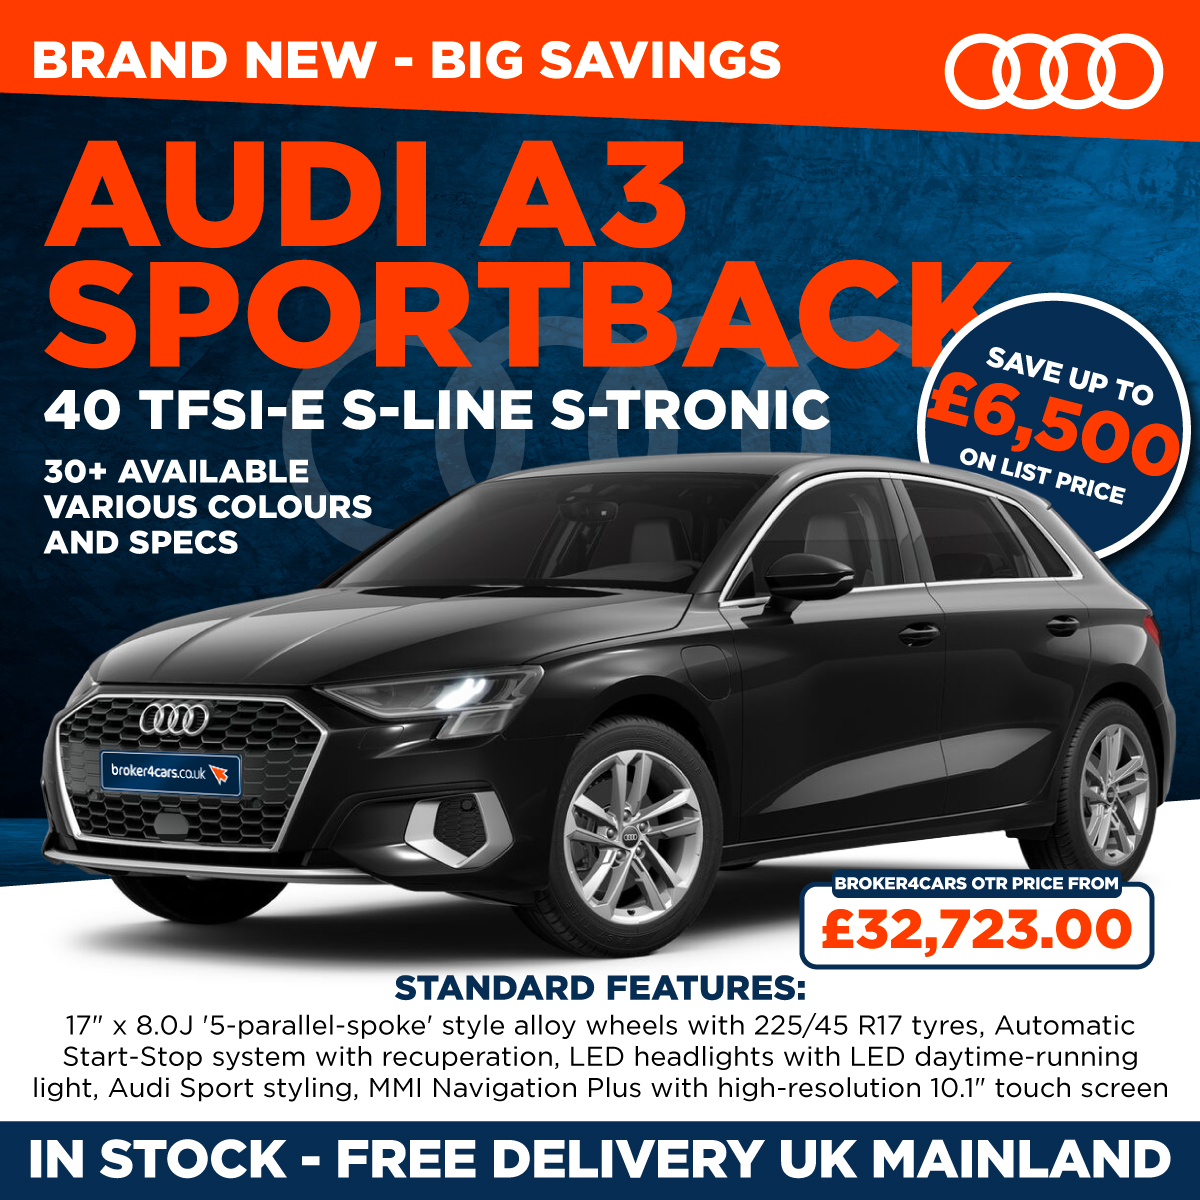 Audi A3 Sportback 40TFSI-E S-Line S-Tronic. 30+ Available various colours and specs. Standard features: 17 Inch x 8.0J 5 Parallel Spoke Style Alloy Wheels with 225/45 R17 Tyres, Automatic Start Stop system with recuperation, LED headlights with LED daytime running light, Audi sport styling, MMI Navigation Plus with high-resolution 10.1 inch touch screen. In stock - Free delivery UK Mainland. Save up to £6,500. Broker4Cars Price £32,723 OTR